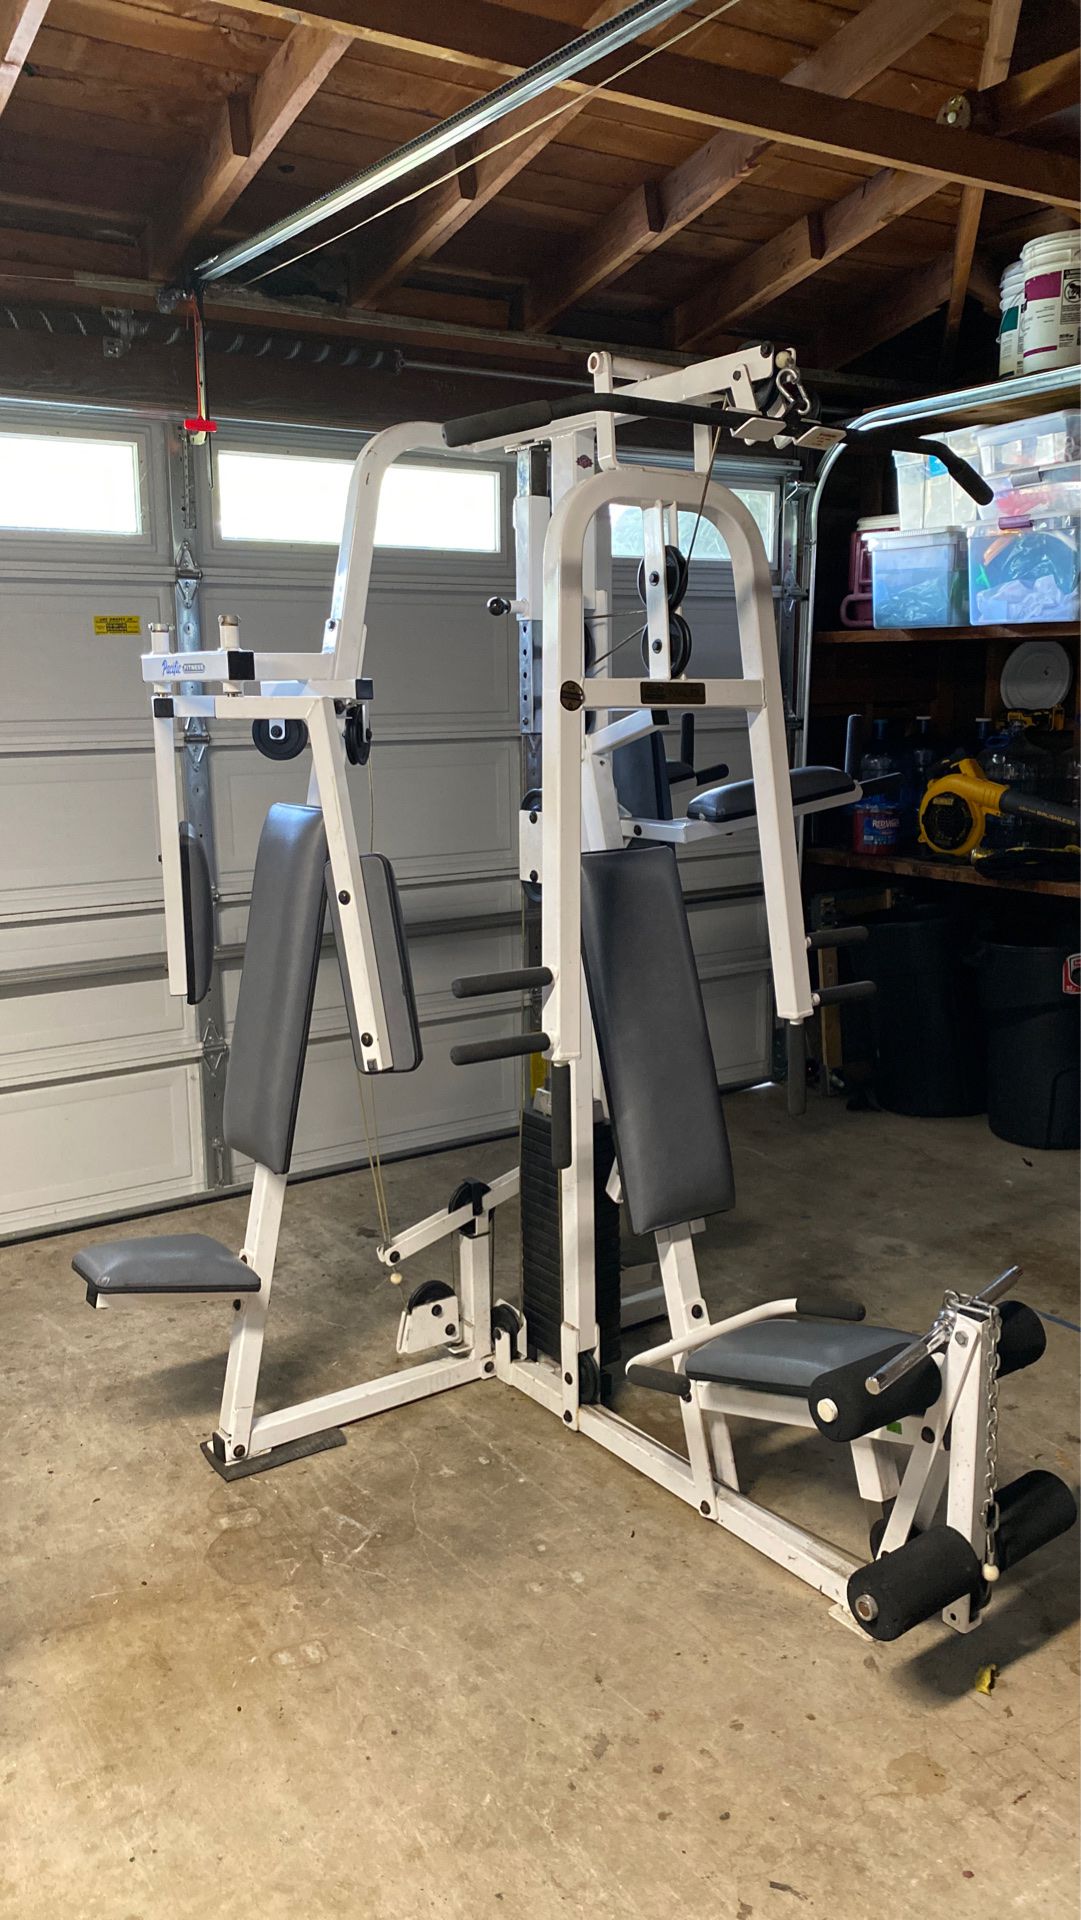 Pacific Fitness - MALIBU - Professional Weight Lifting Home Gym - 200Lbs Stack